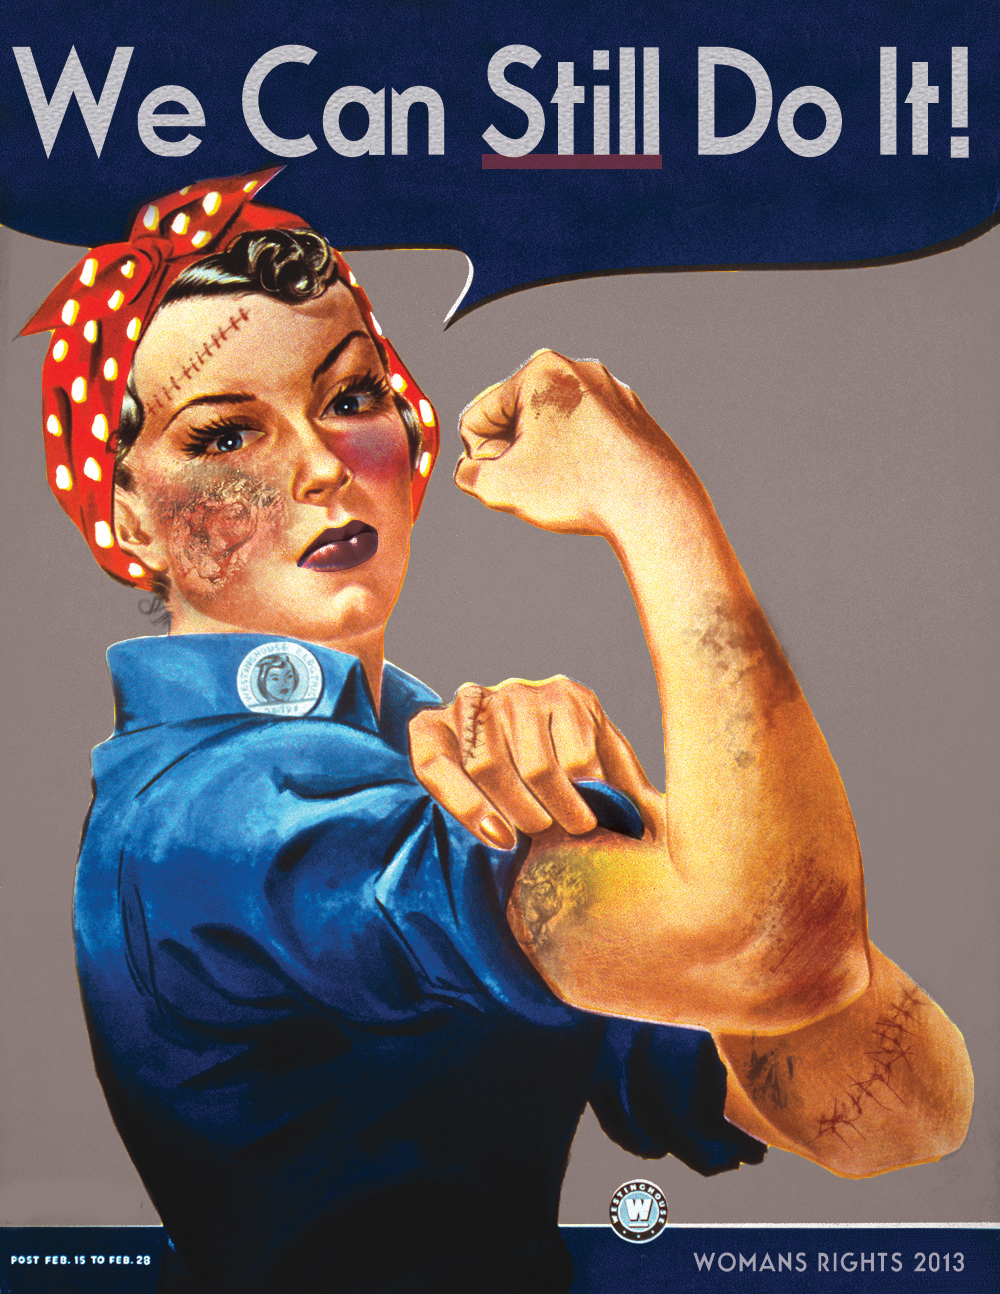 we_can_still_do_it___feminist_poster_design_by_nyclaura-d8y29vi.jpg